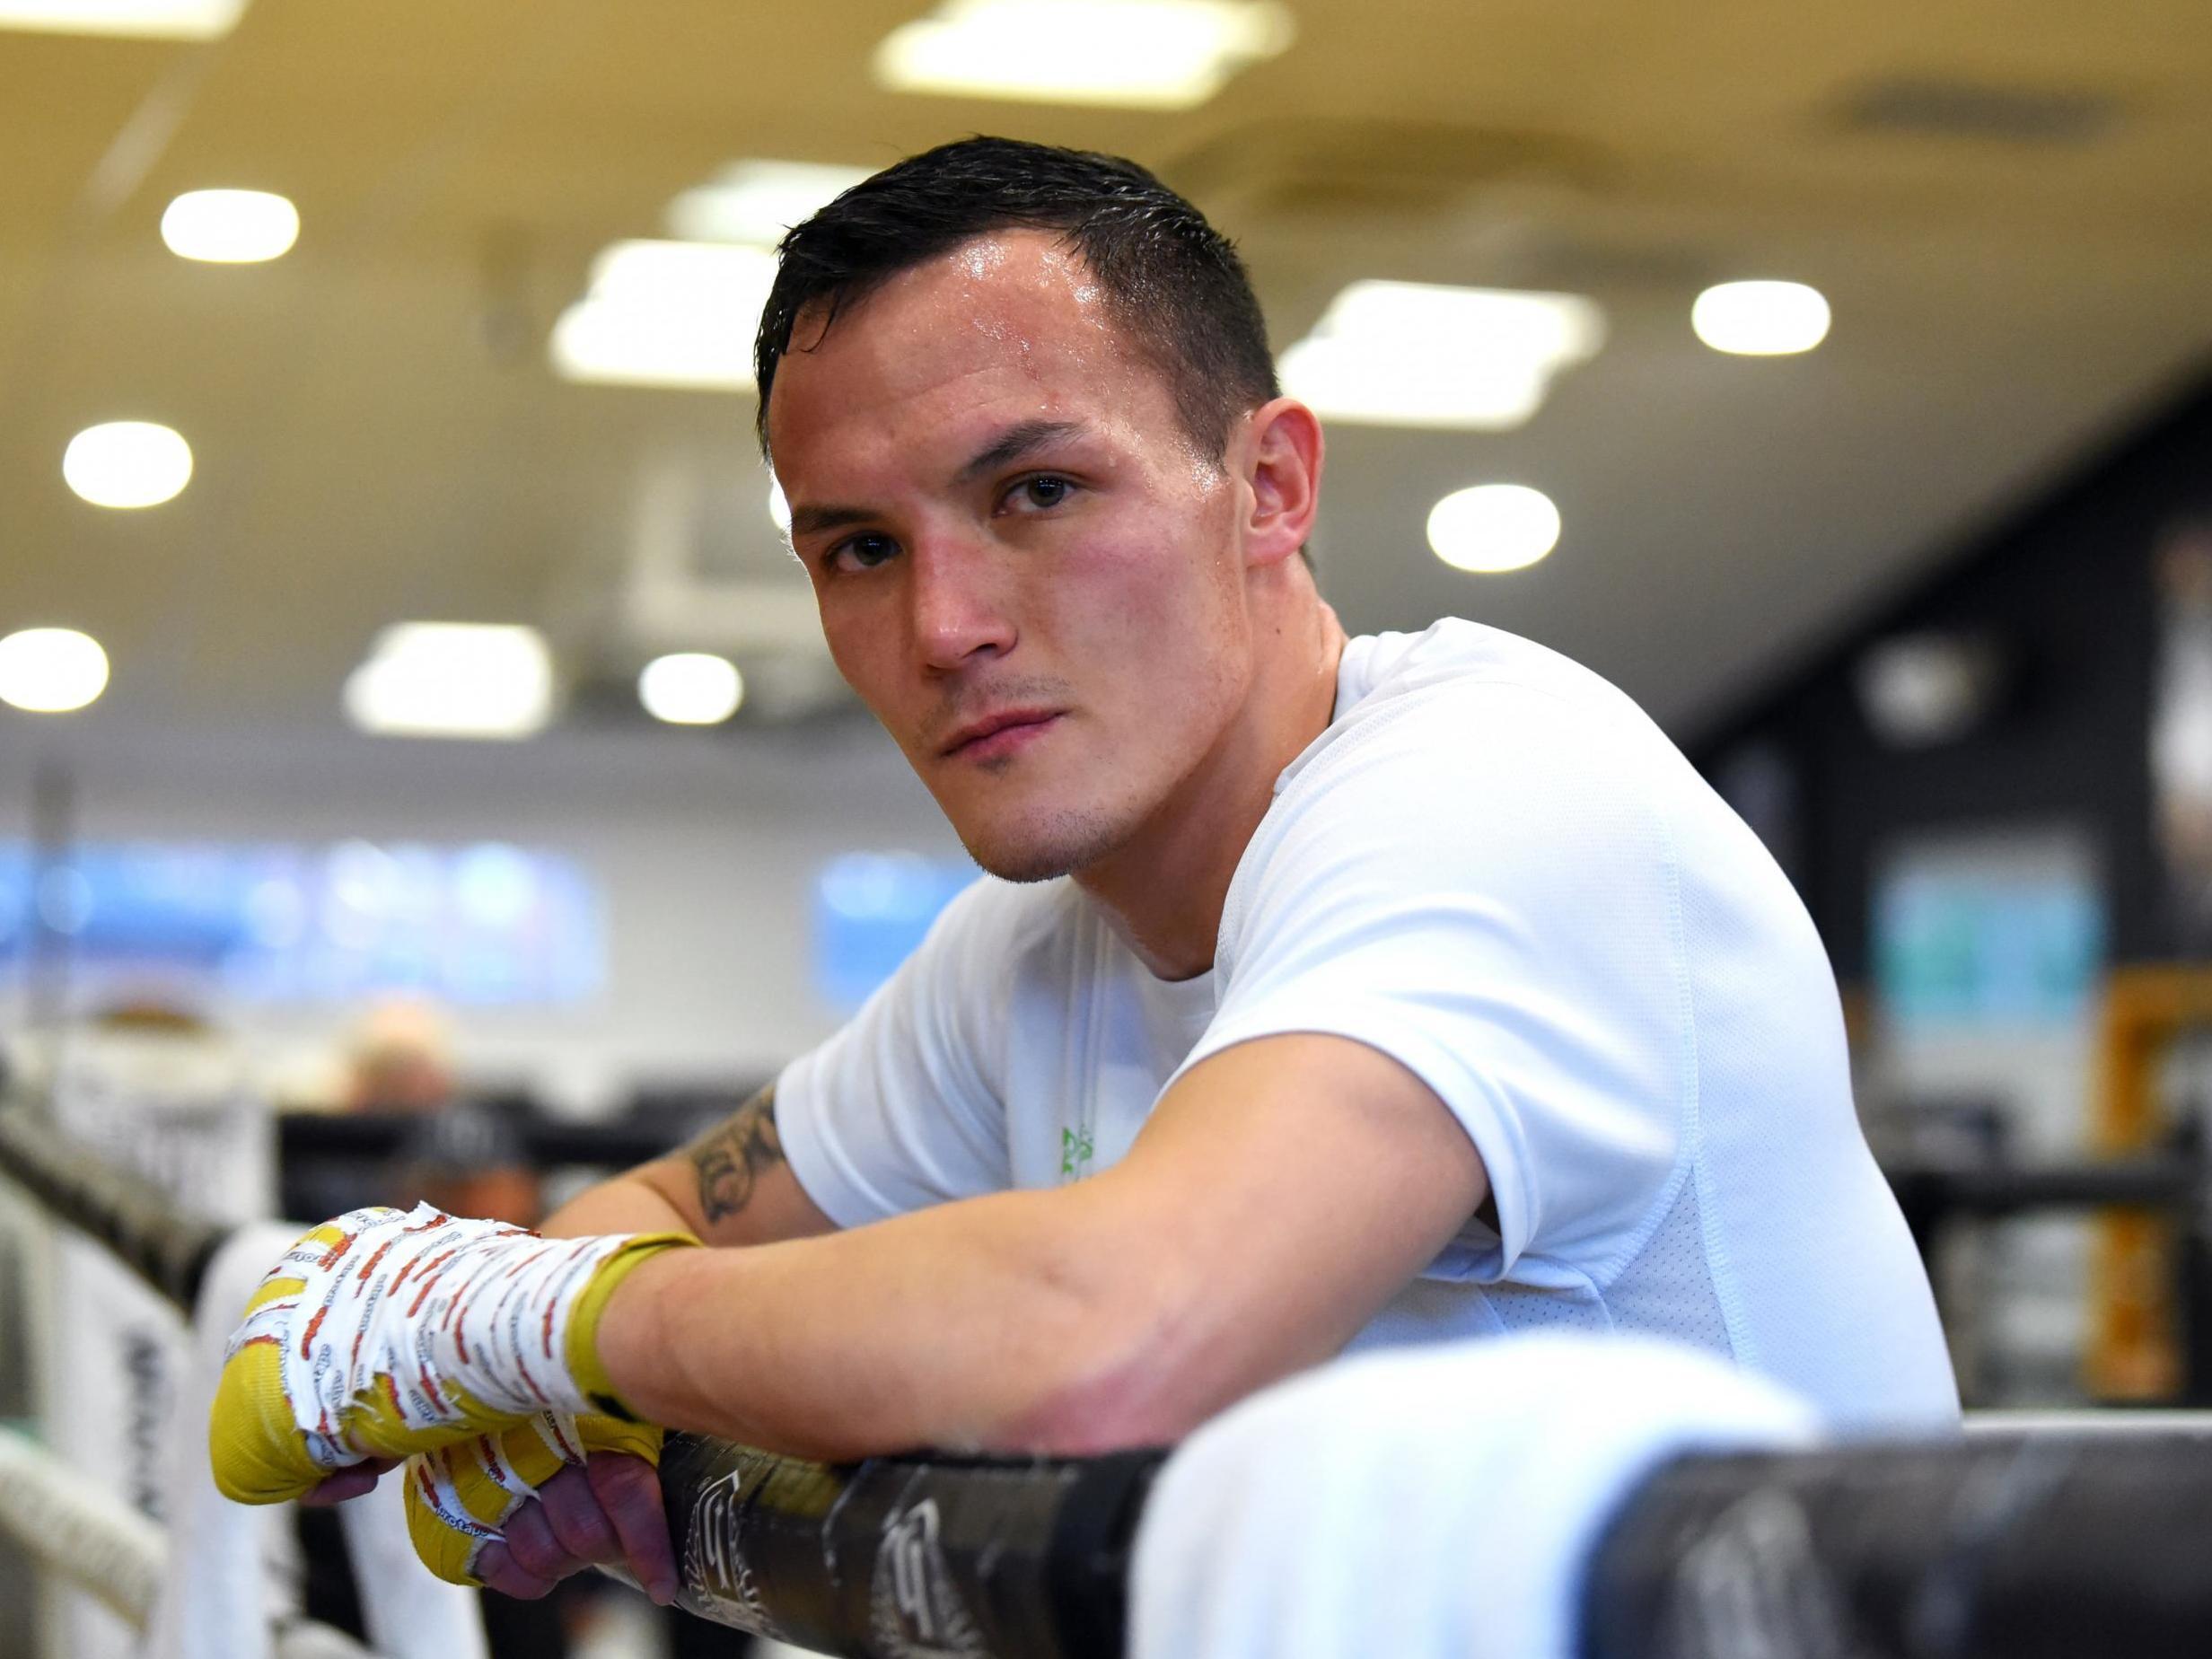 Josh Warrington is back in the ring this weekend